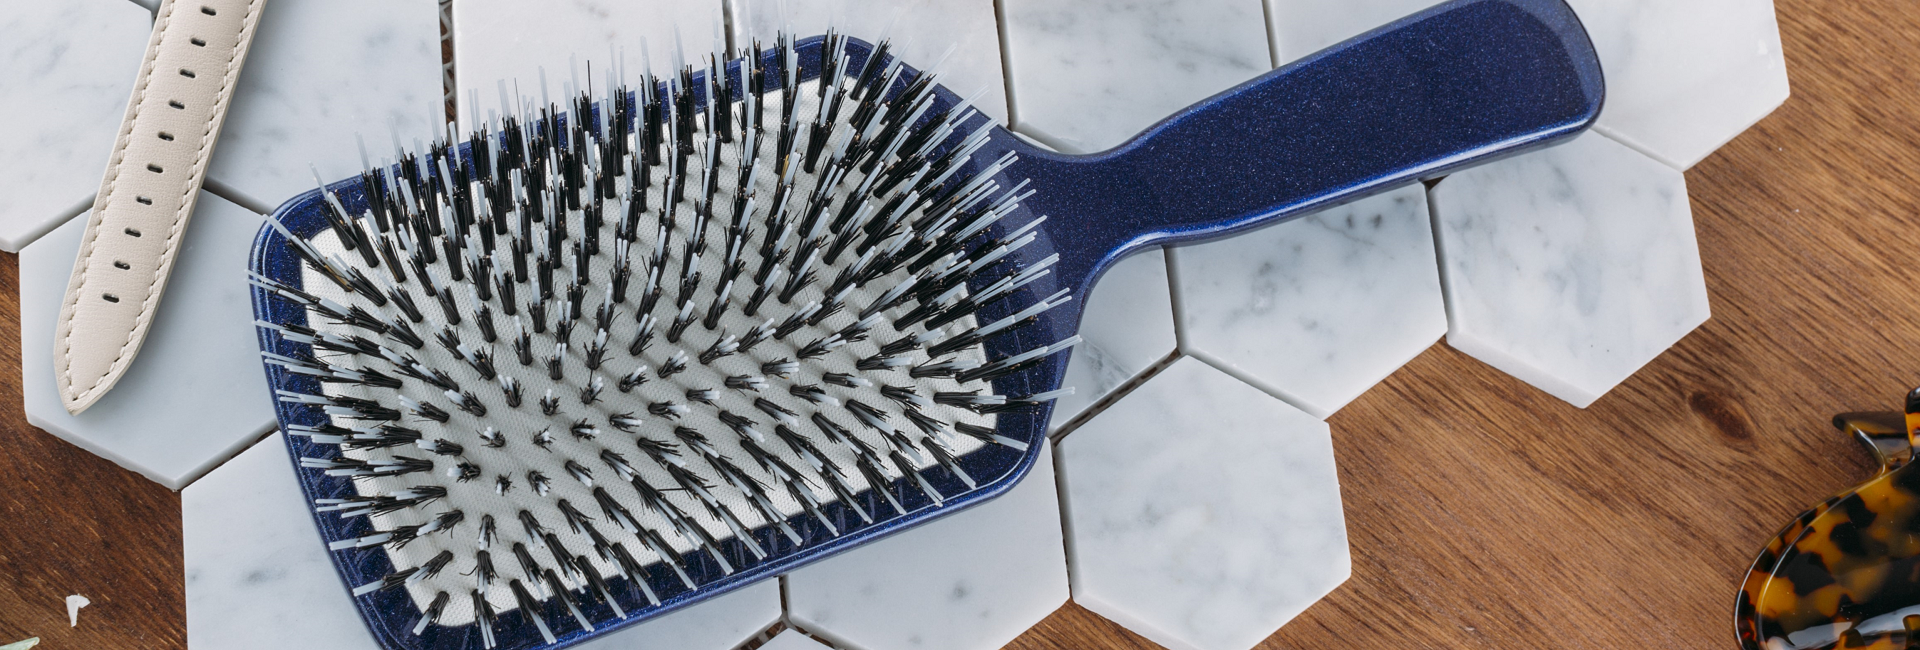 collections/Acca_Kappa_Brush_for_Hair_Extensions.png